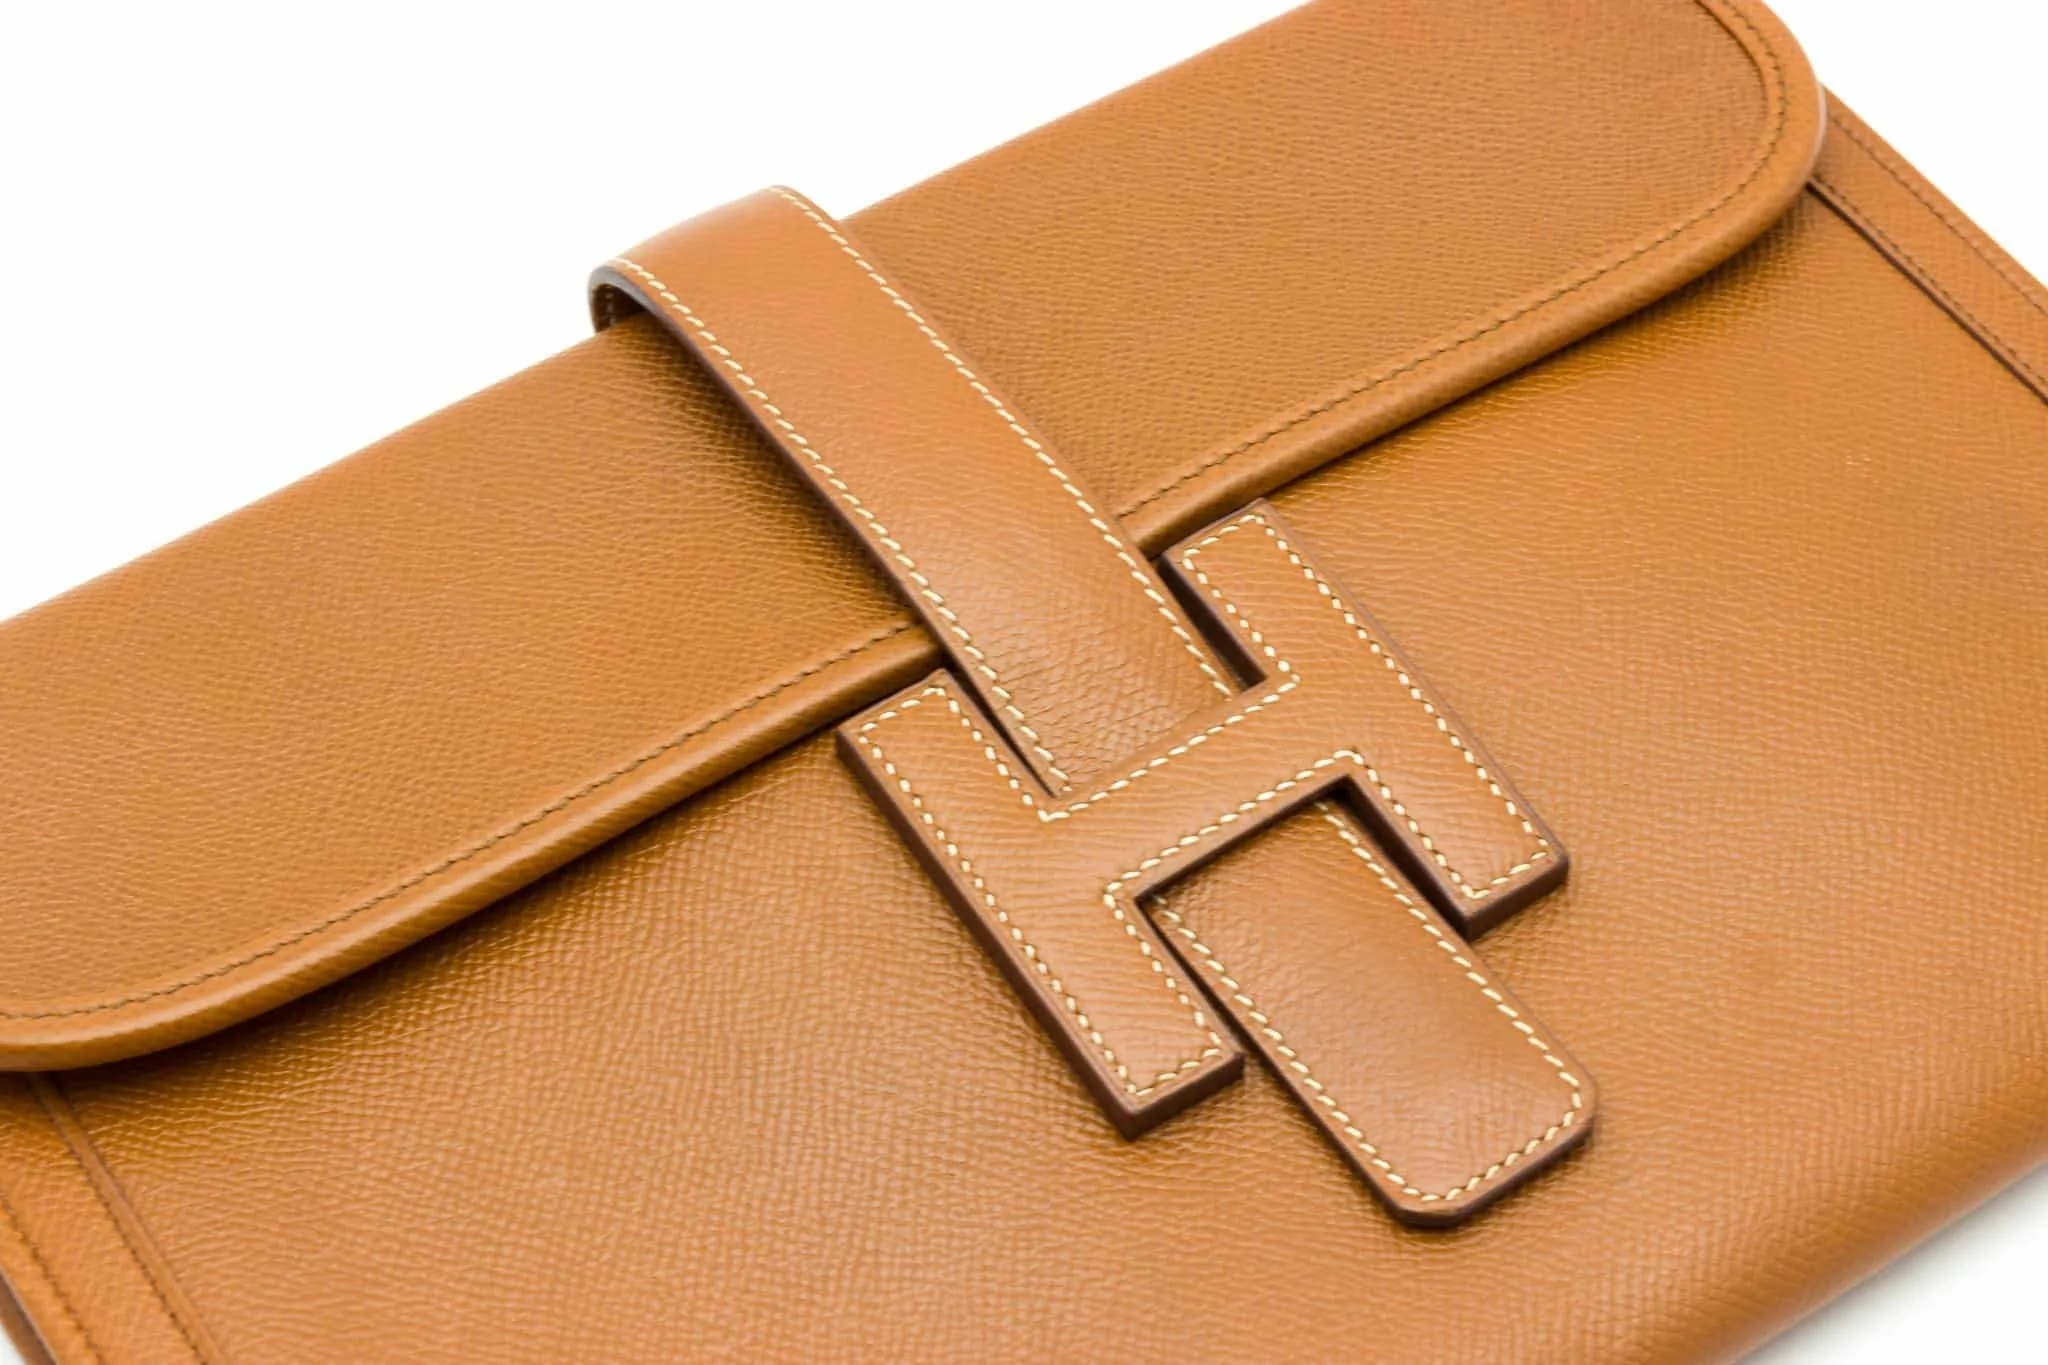 Sold at Auction: A HERMES JIGE CLUTCH BAG